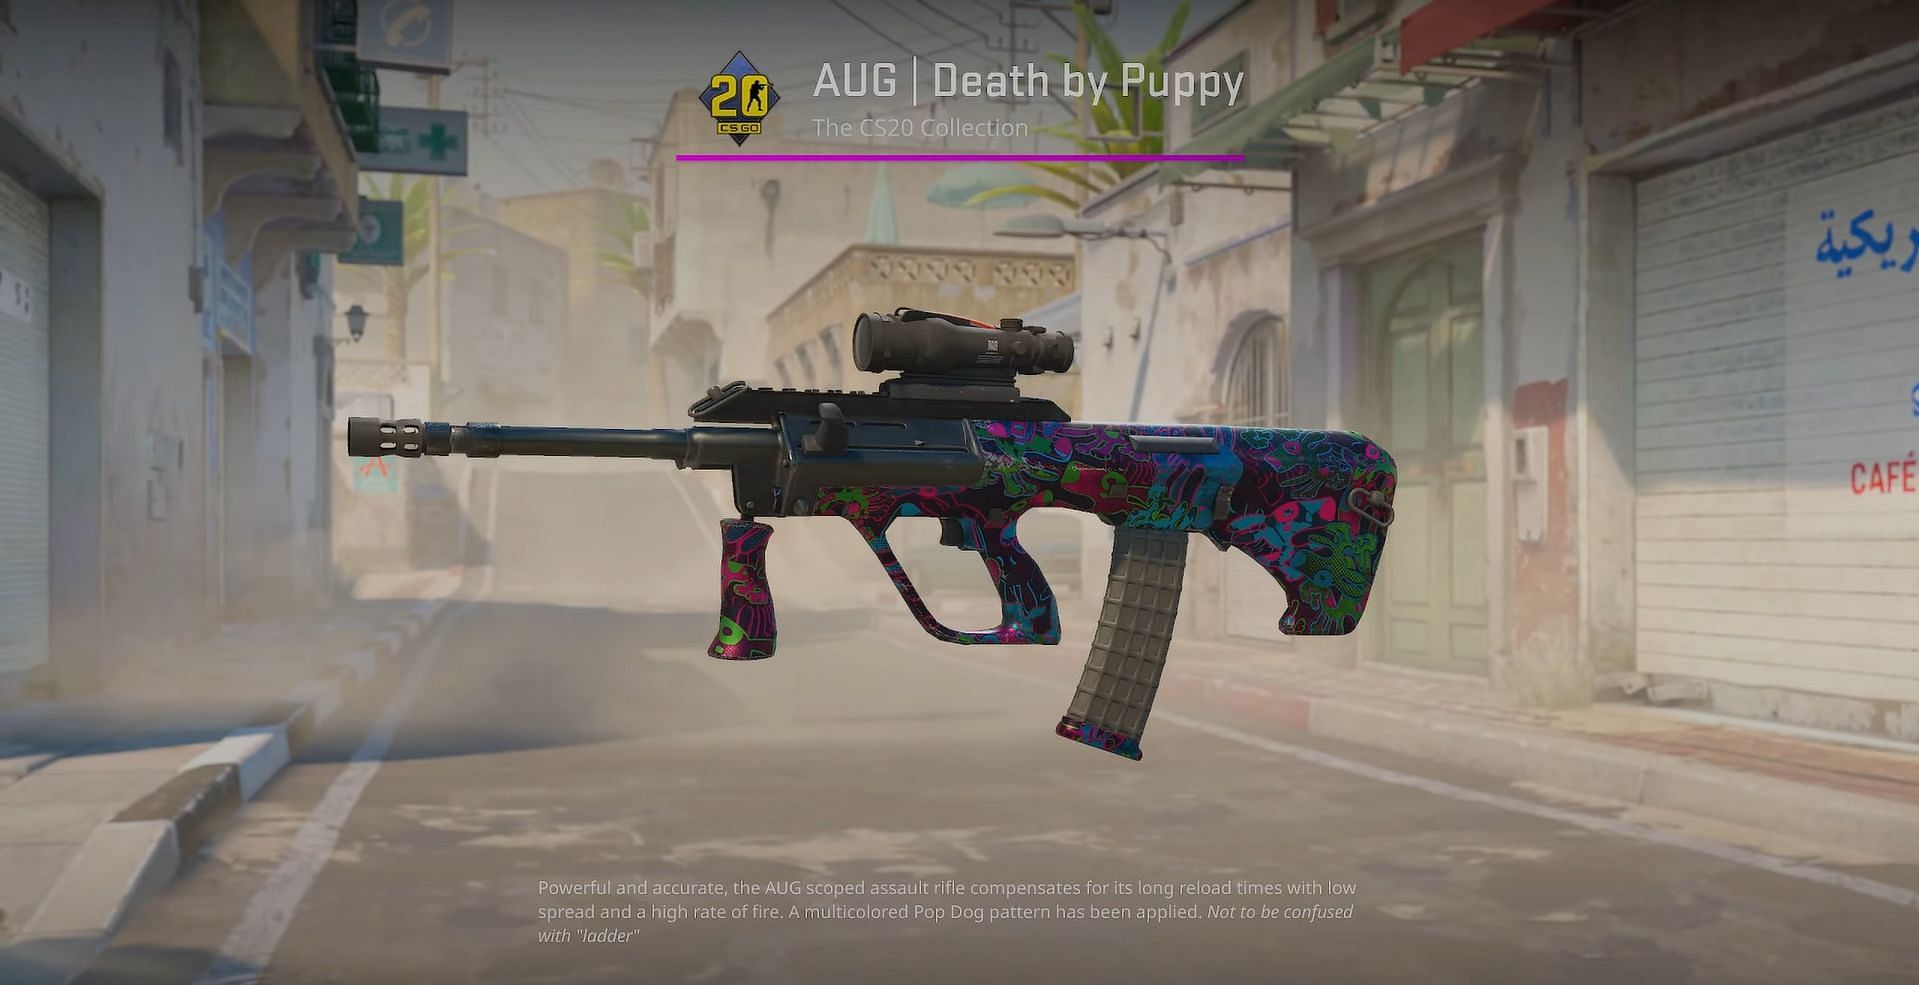 AUG Death by Puppy (Image via Valve || YouTube/covernant)